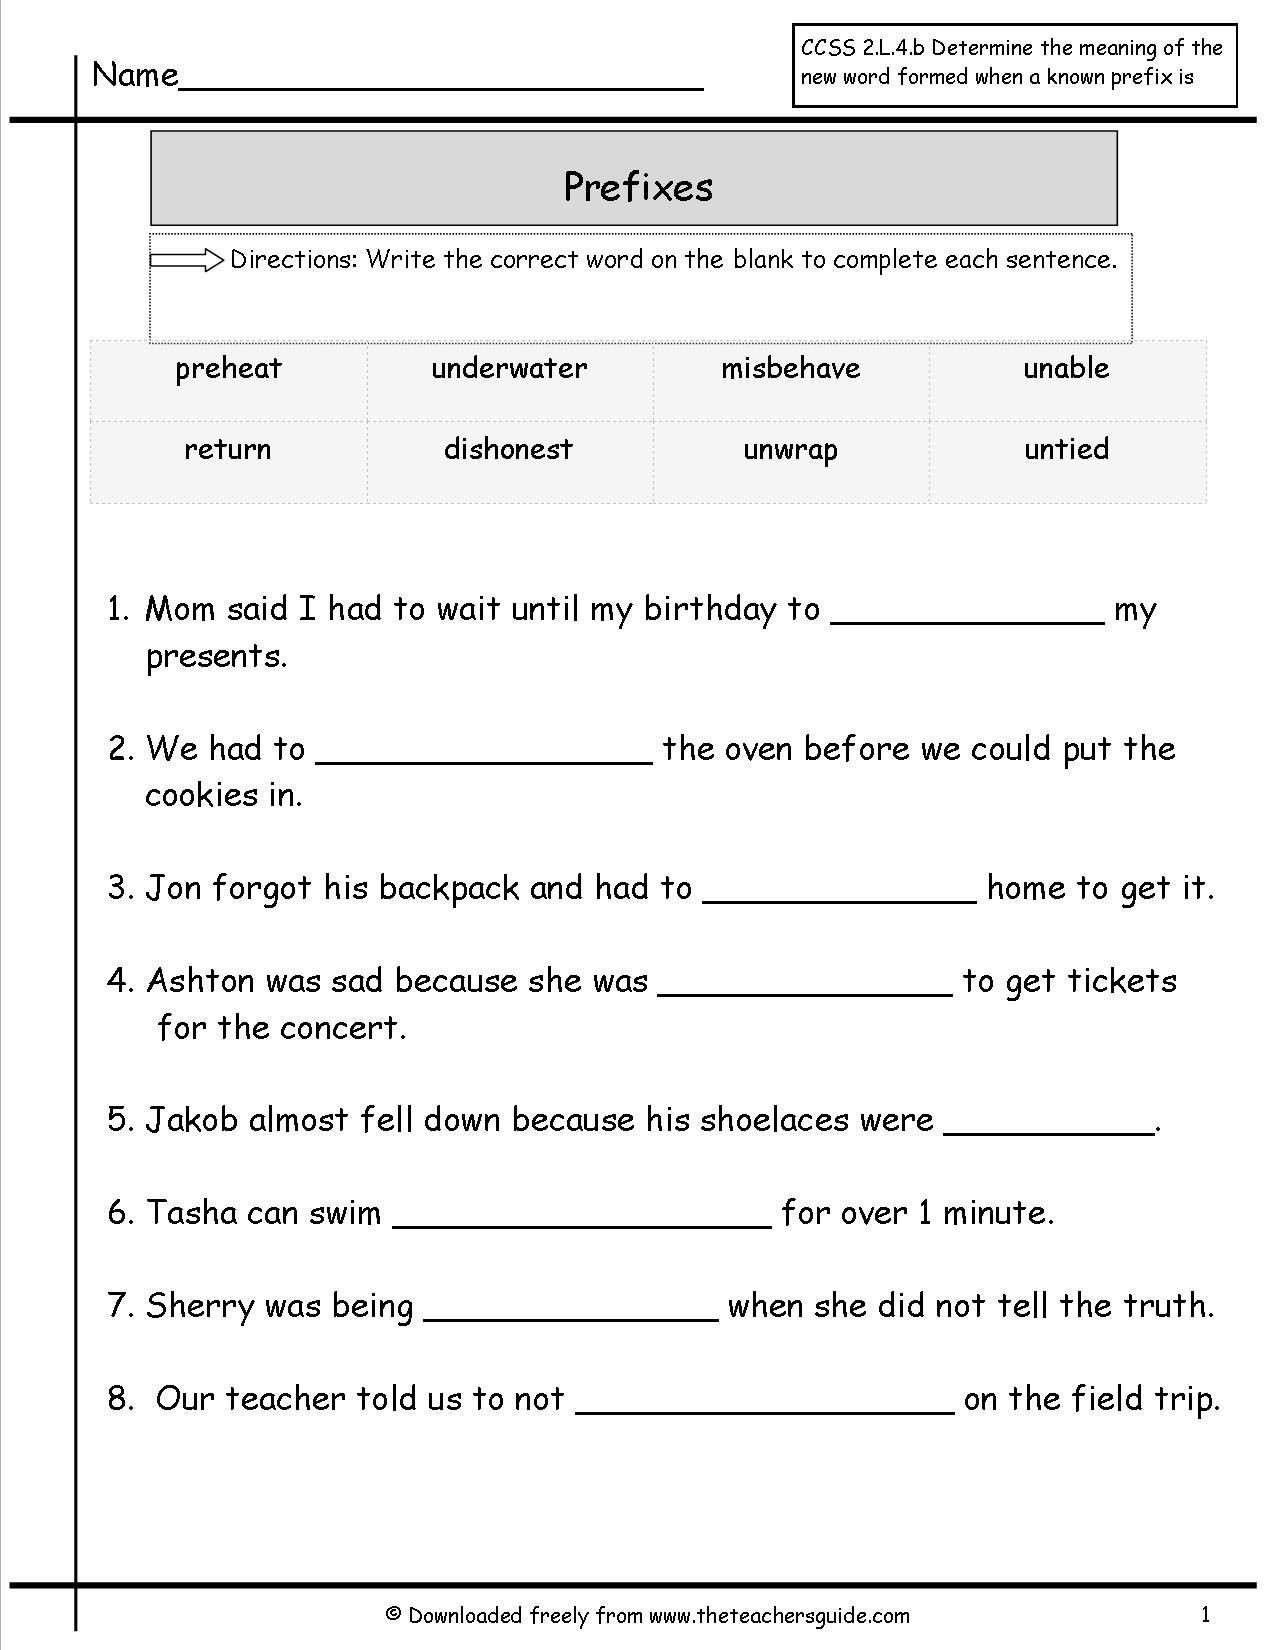 Suffixes Worksheets for 3rd Grade Prefixes and Suffixes Worksheets Look at This One Next Week